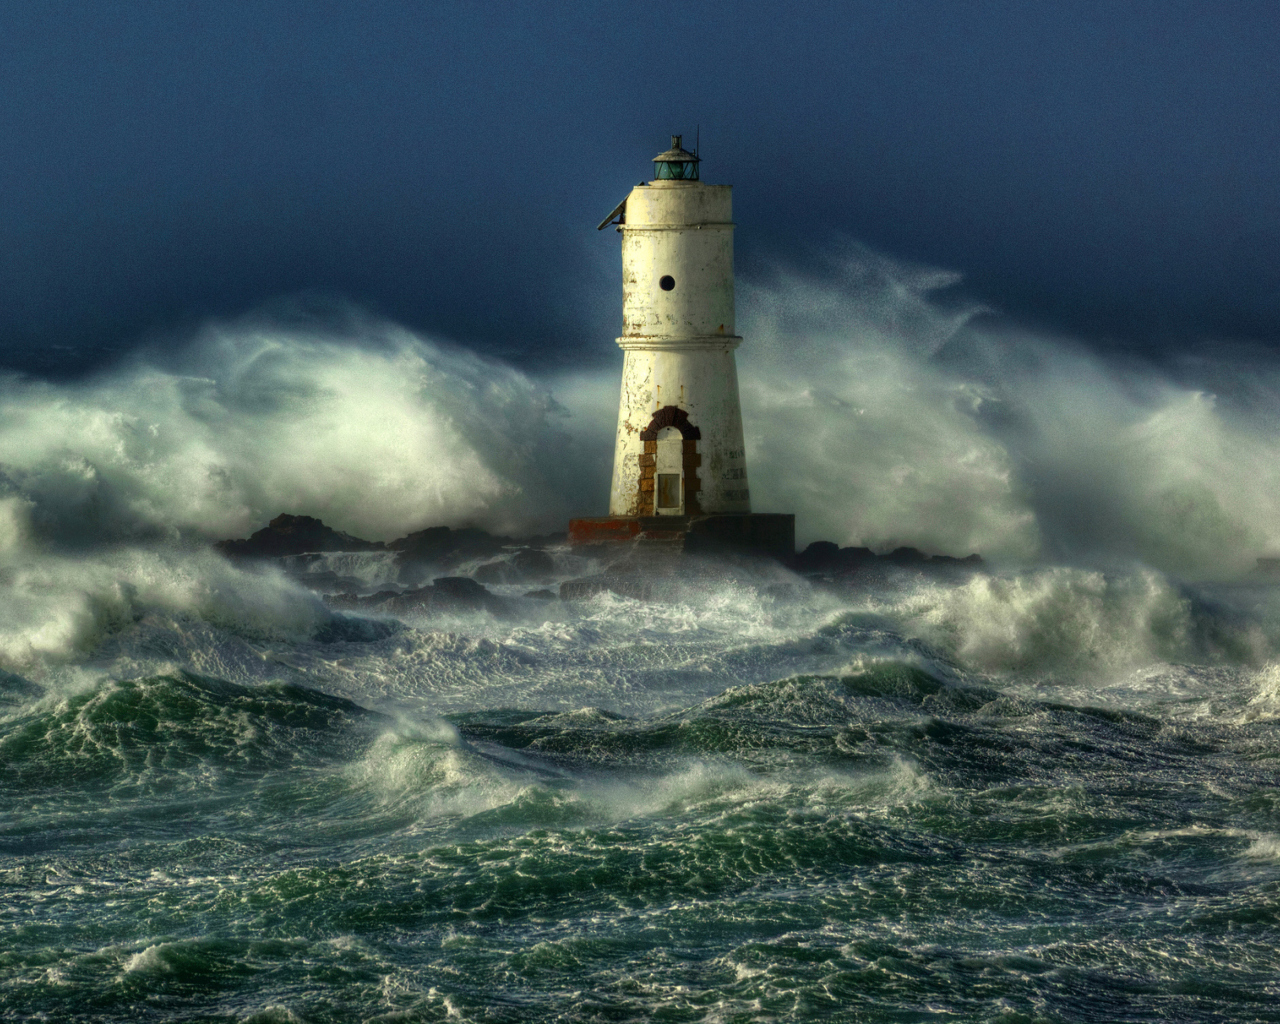 Ocean Storm And Lonely Lighthouse screenshot #1 1280x1024